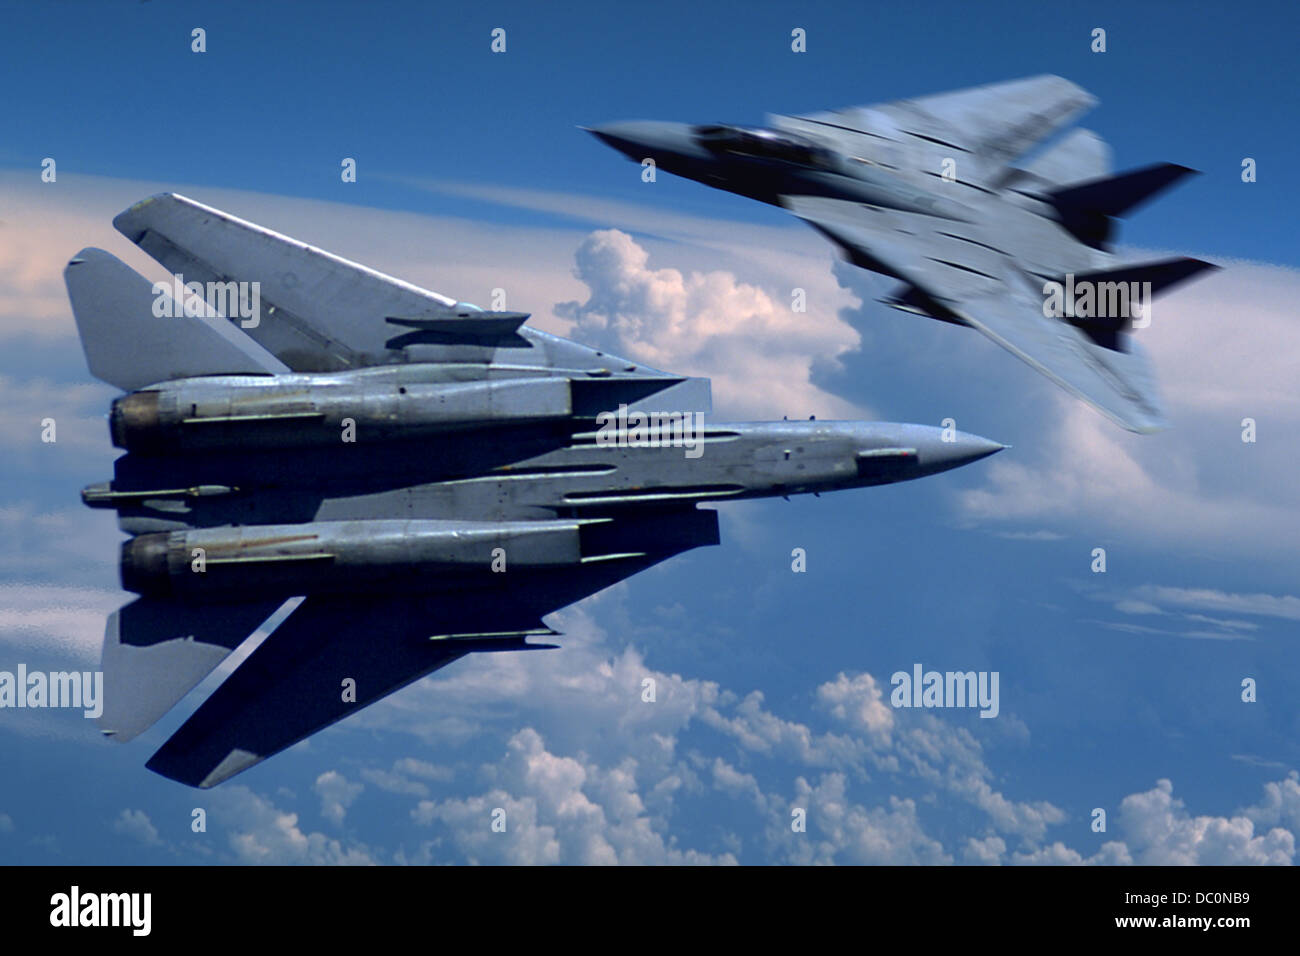 TWO USN F-14 TOMCATS FLYING OVER CLOUDS Stock Photo